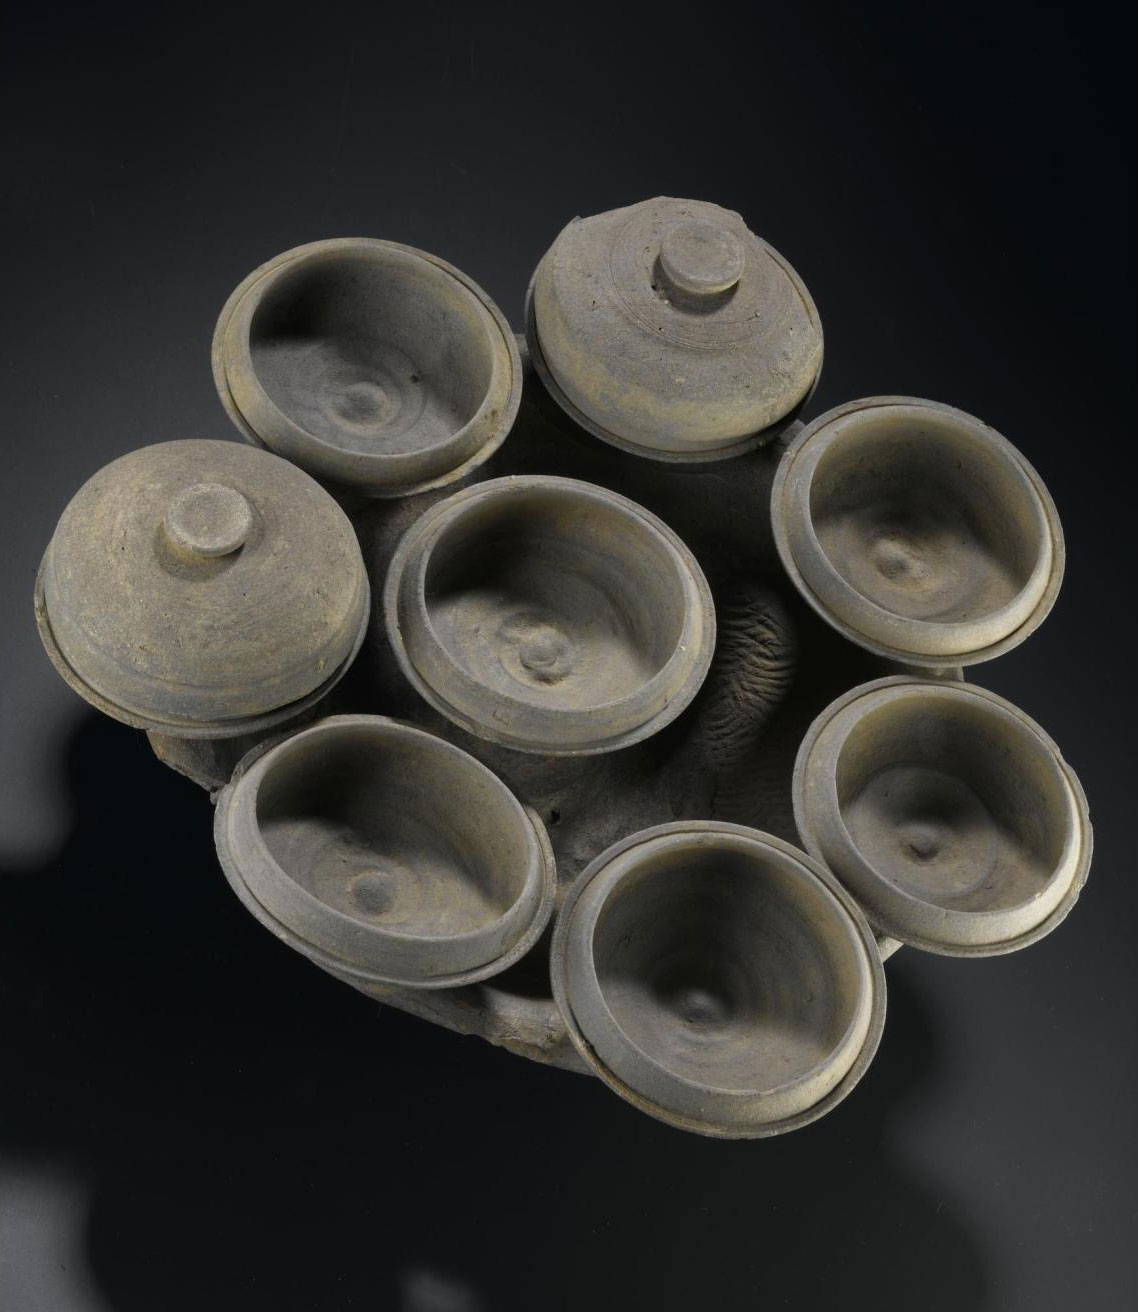 Cluster of grey stoneware dishes: Japan, Yamato Province, Dolmen period.